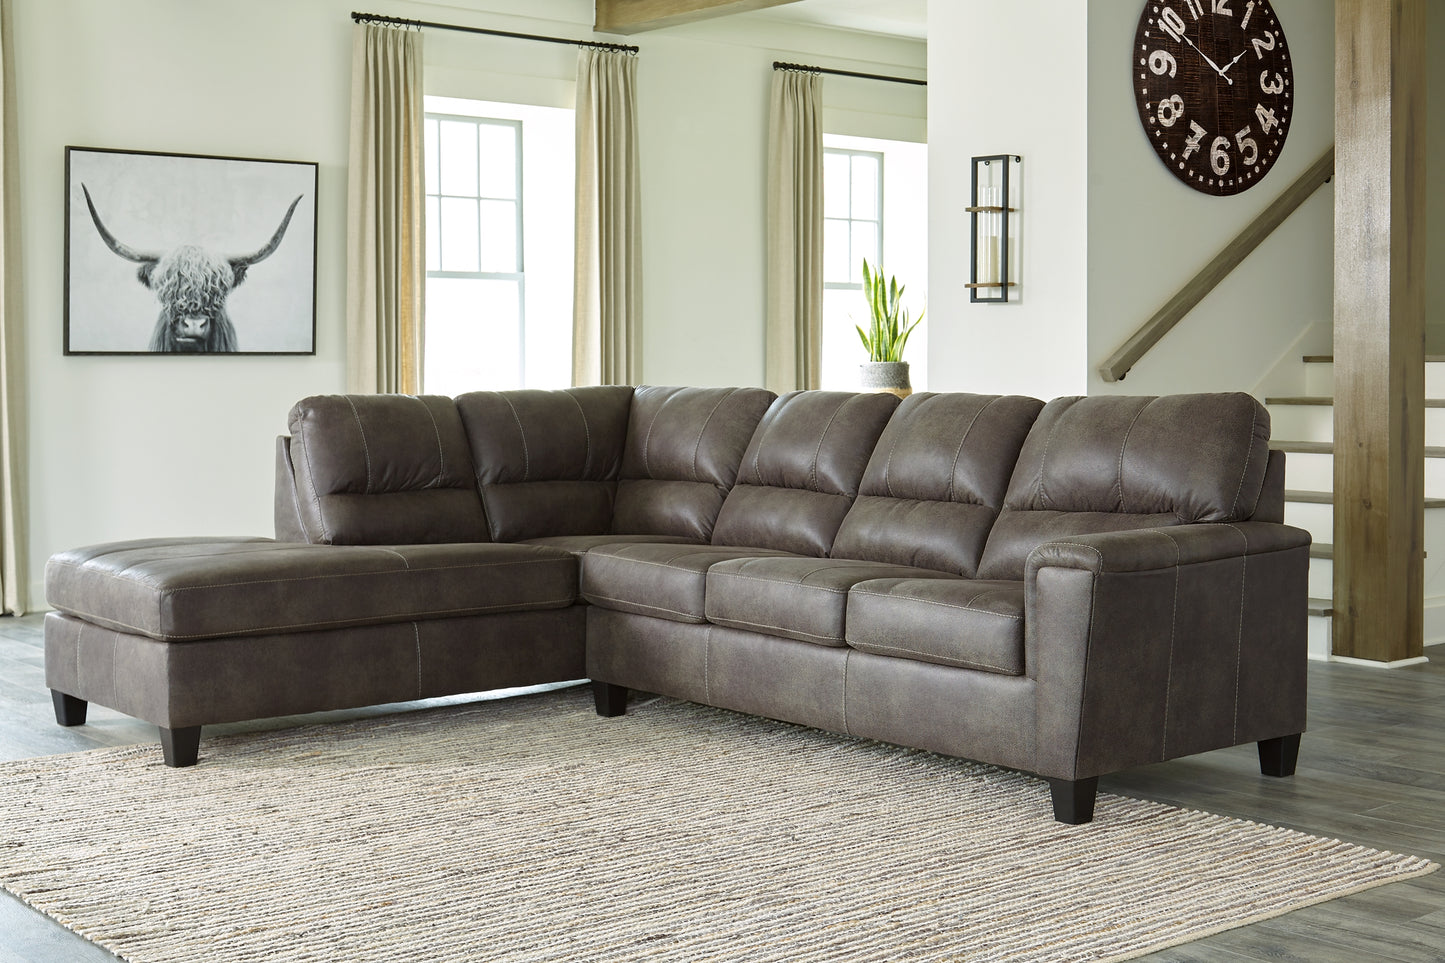 Navi 2-Piece Sectional with Chaise Wilson Furniture (OH)  in Bridgeport, Ohio. Serving Bridgeport, Yorkville, Bellaire, & Avondale